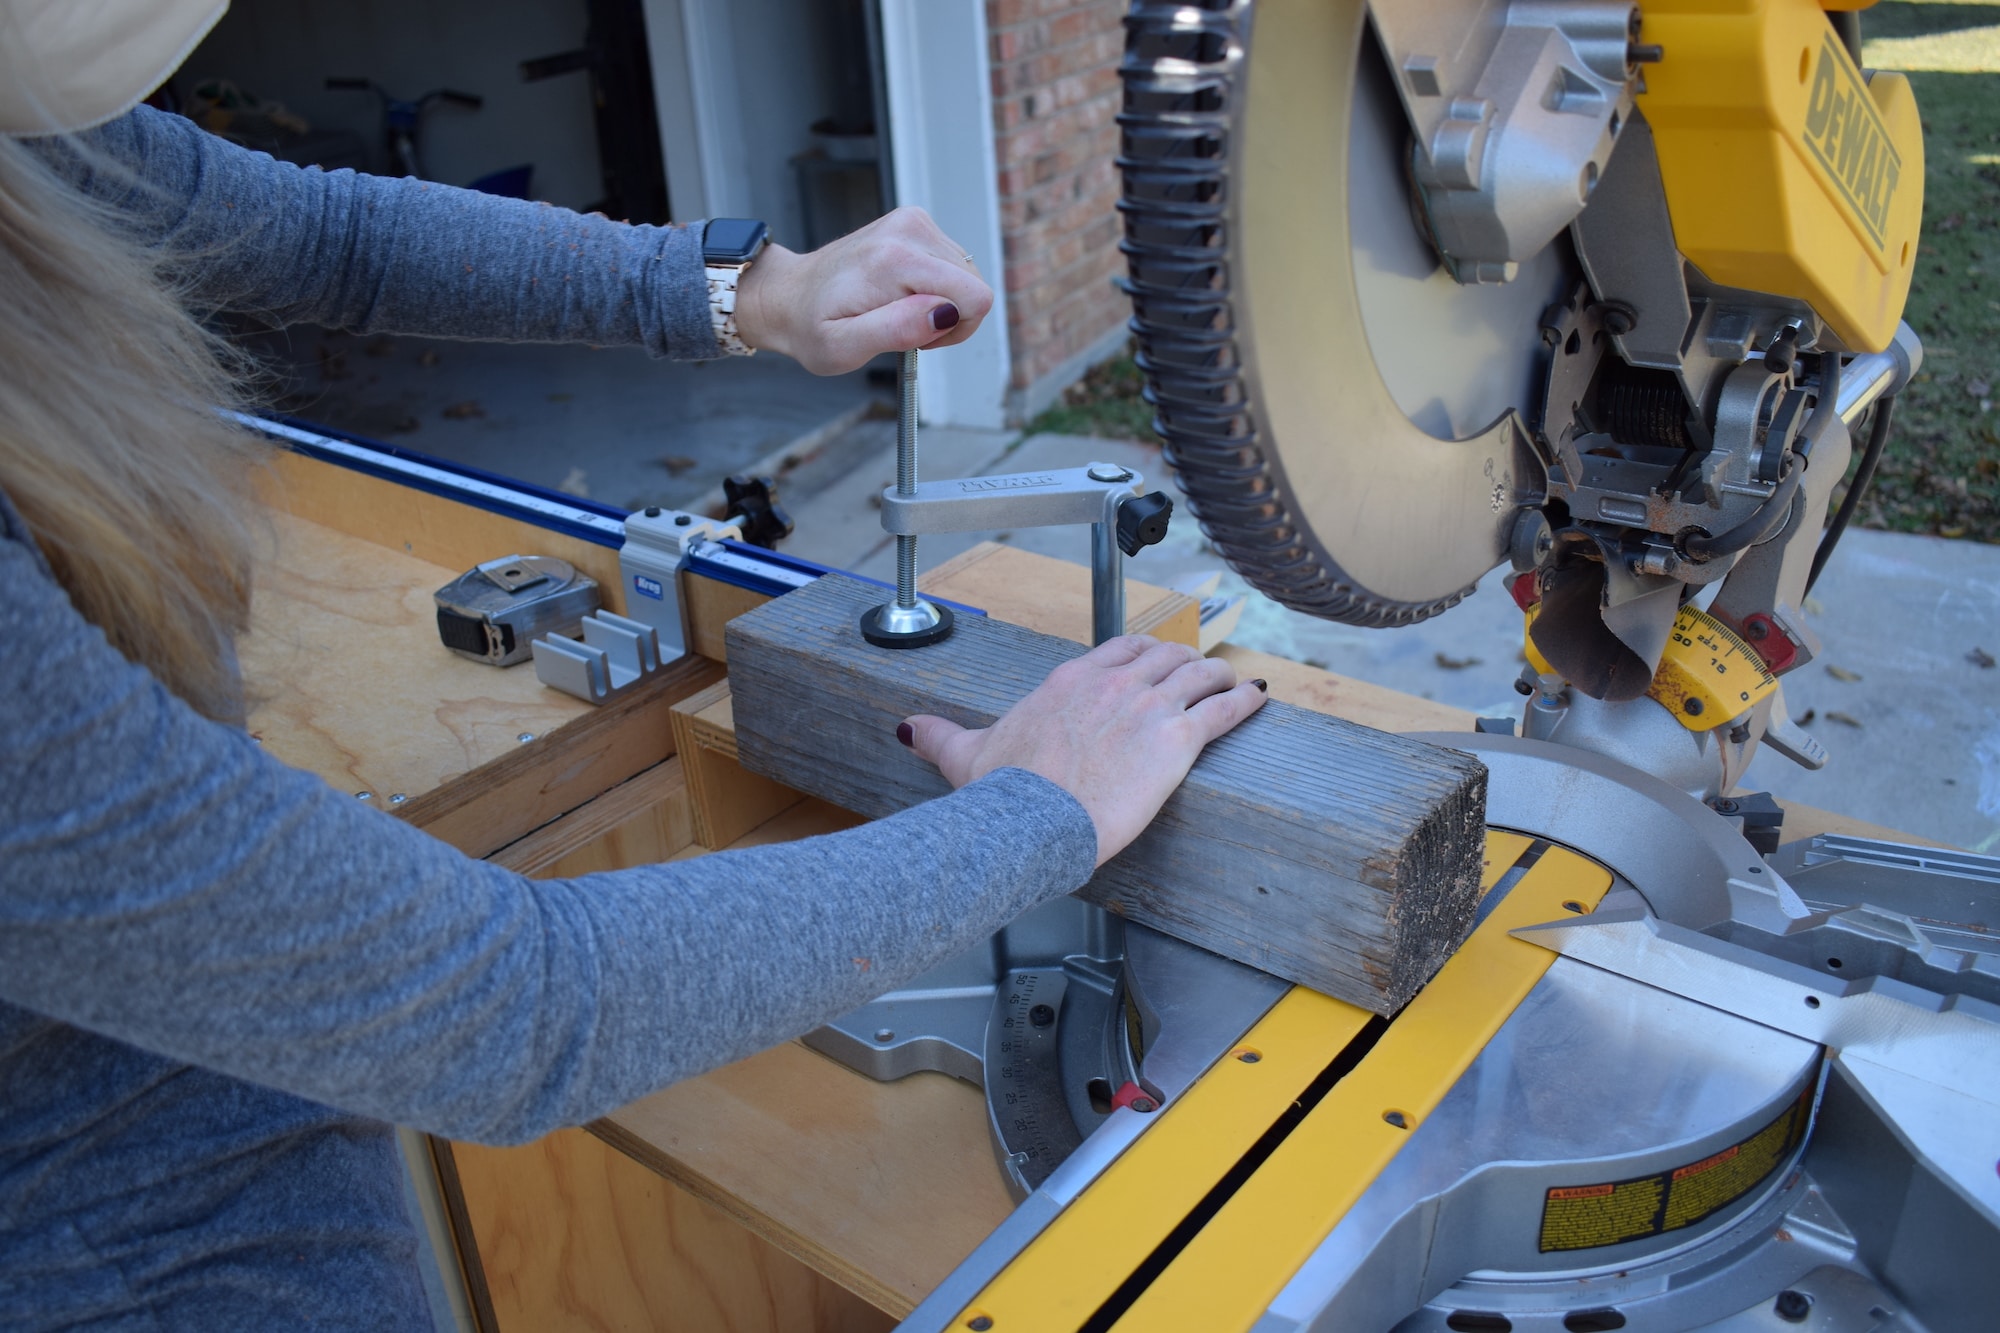 How to Cut Any Angle on a Miter Saw: By Using Scrap Wood